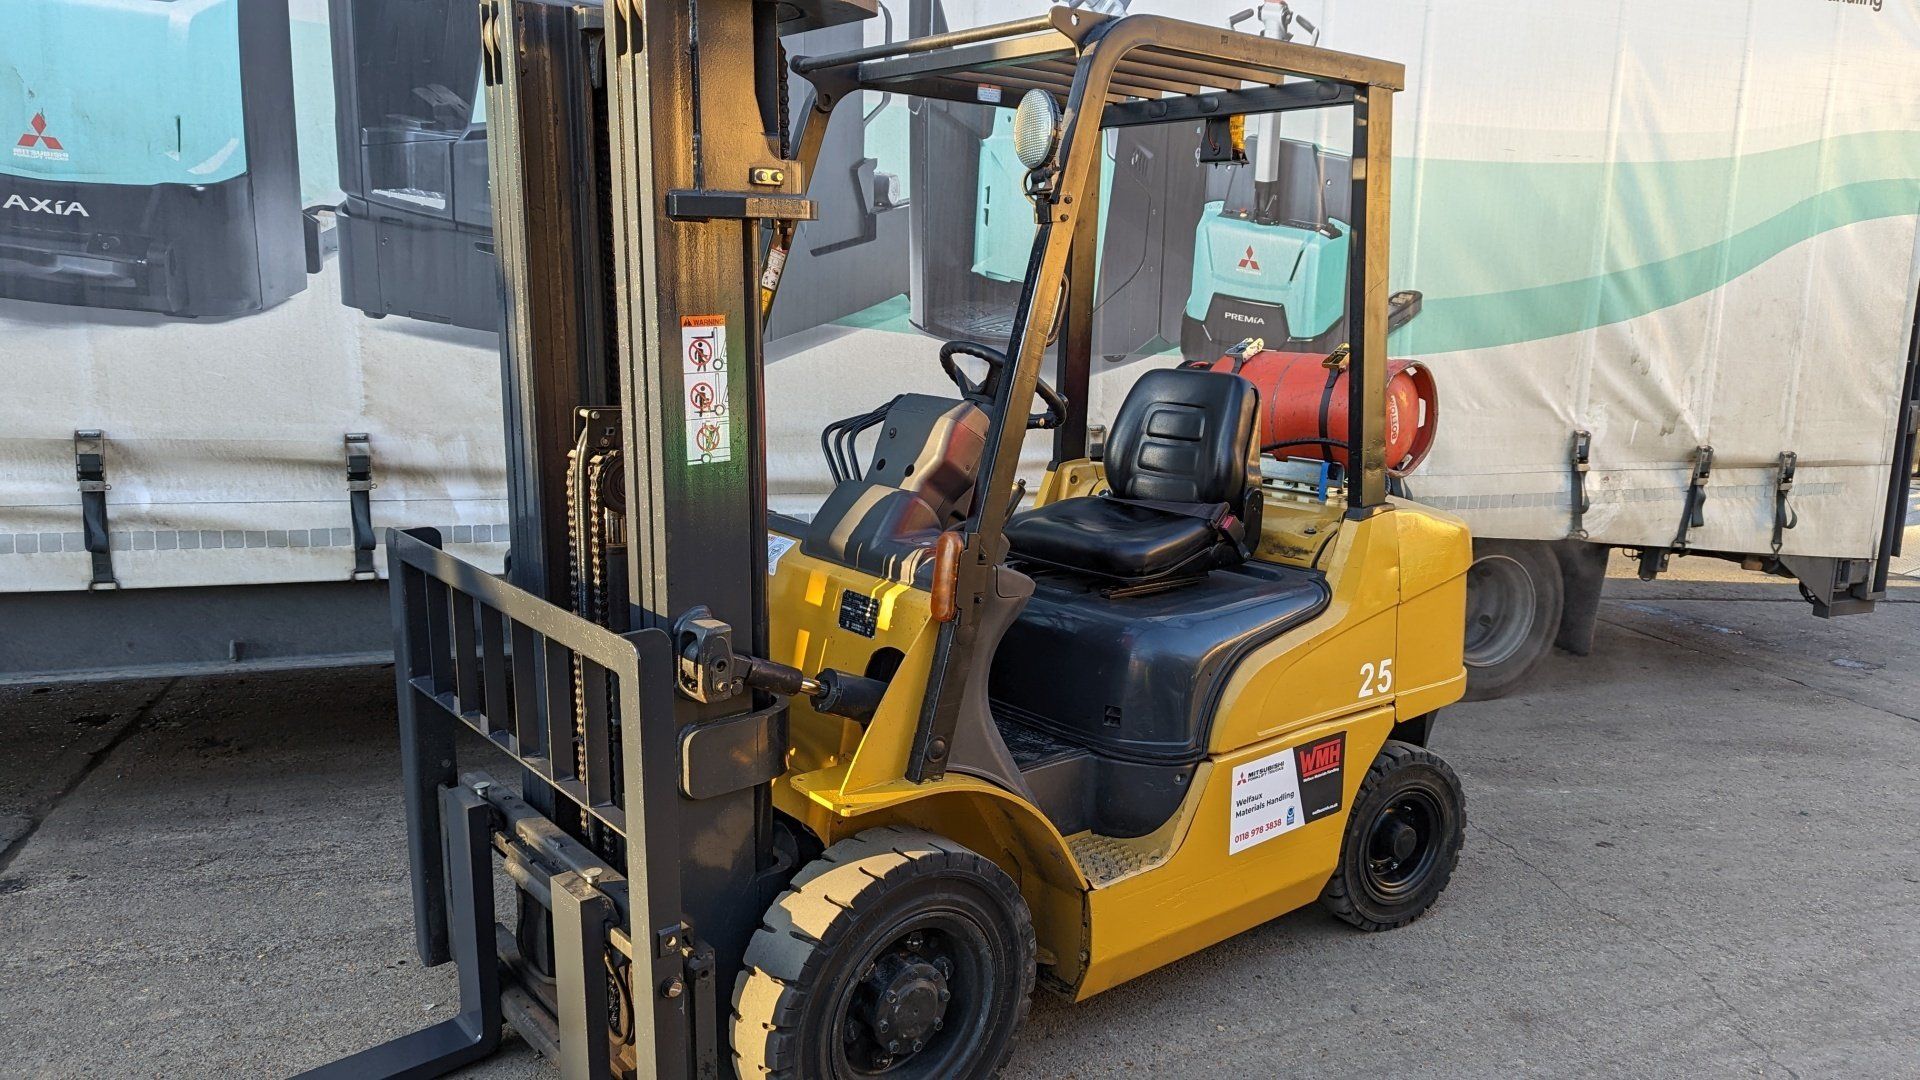 A yellow forklift is parked in front of a truck.